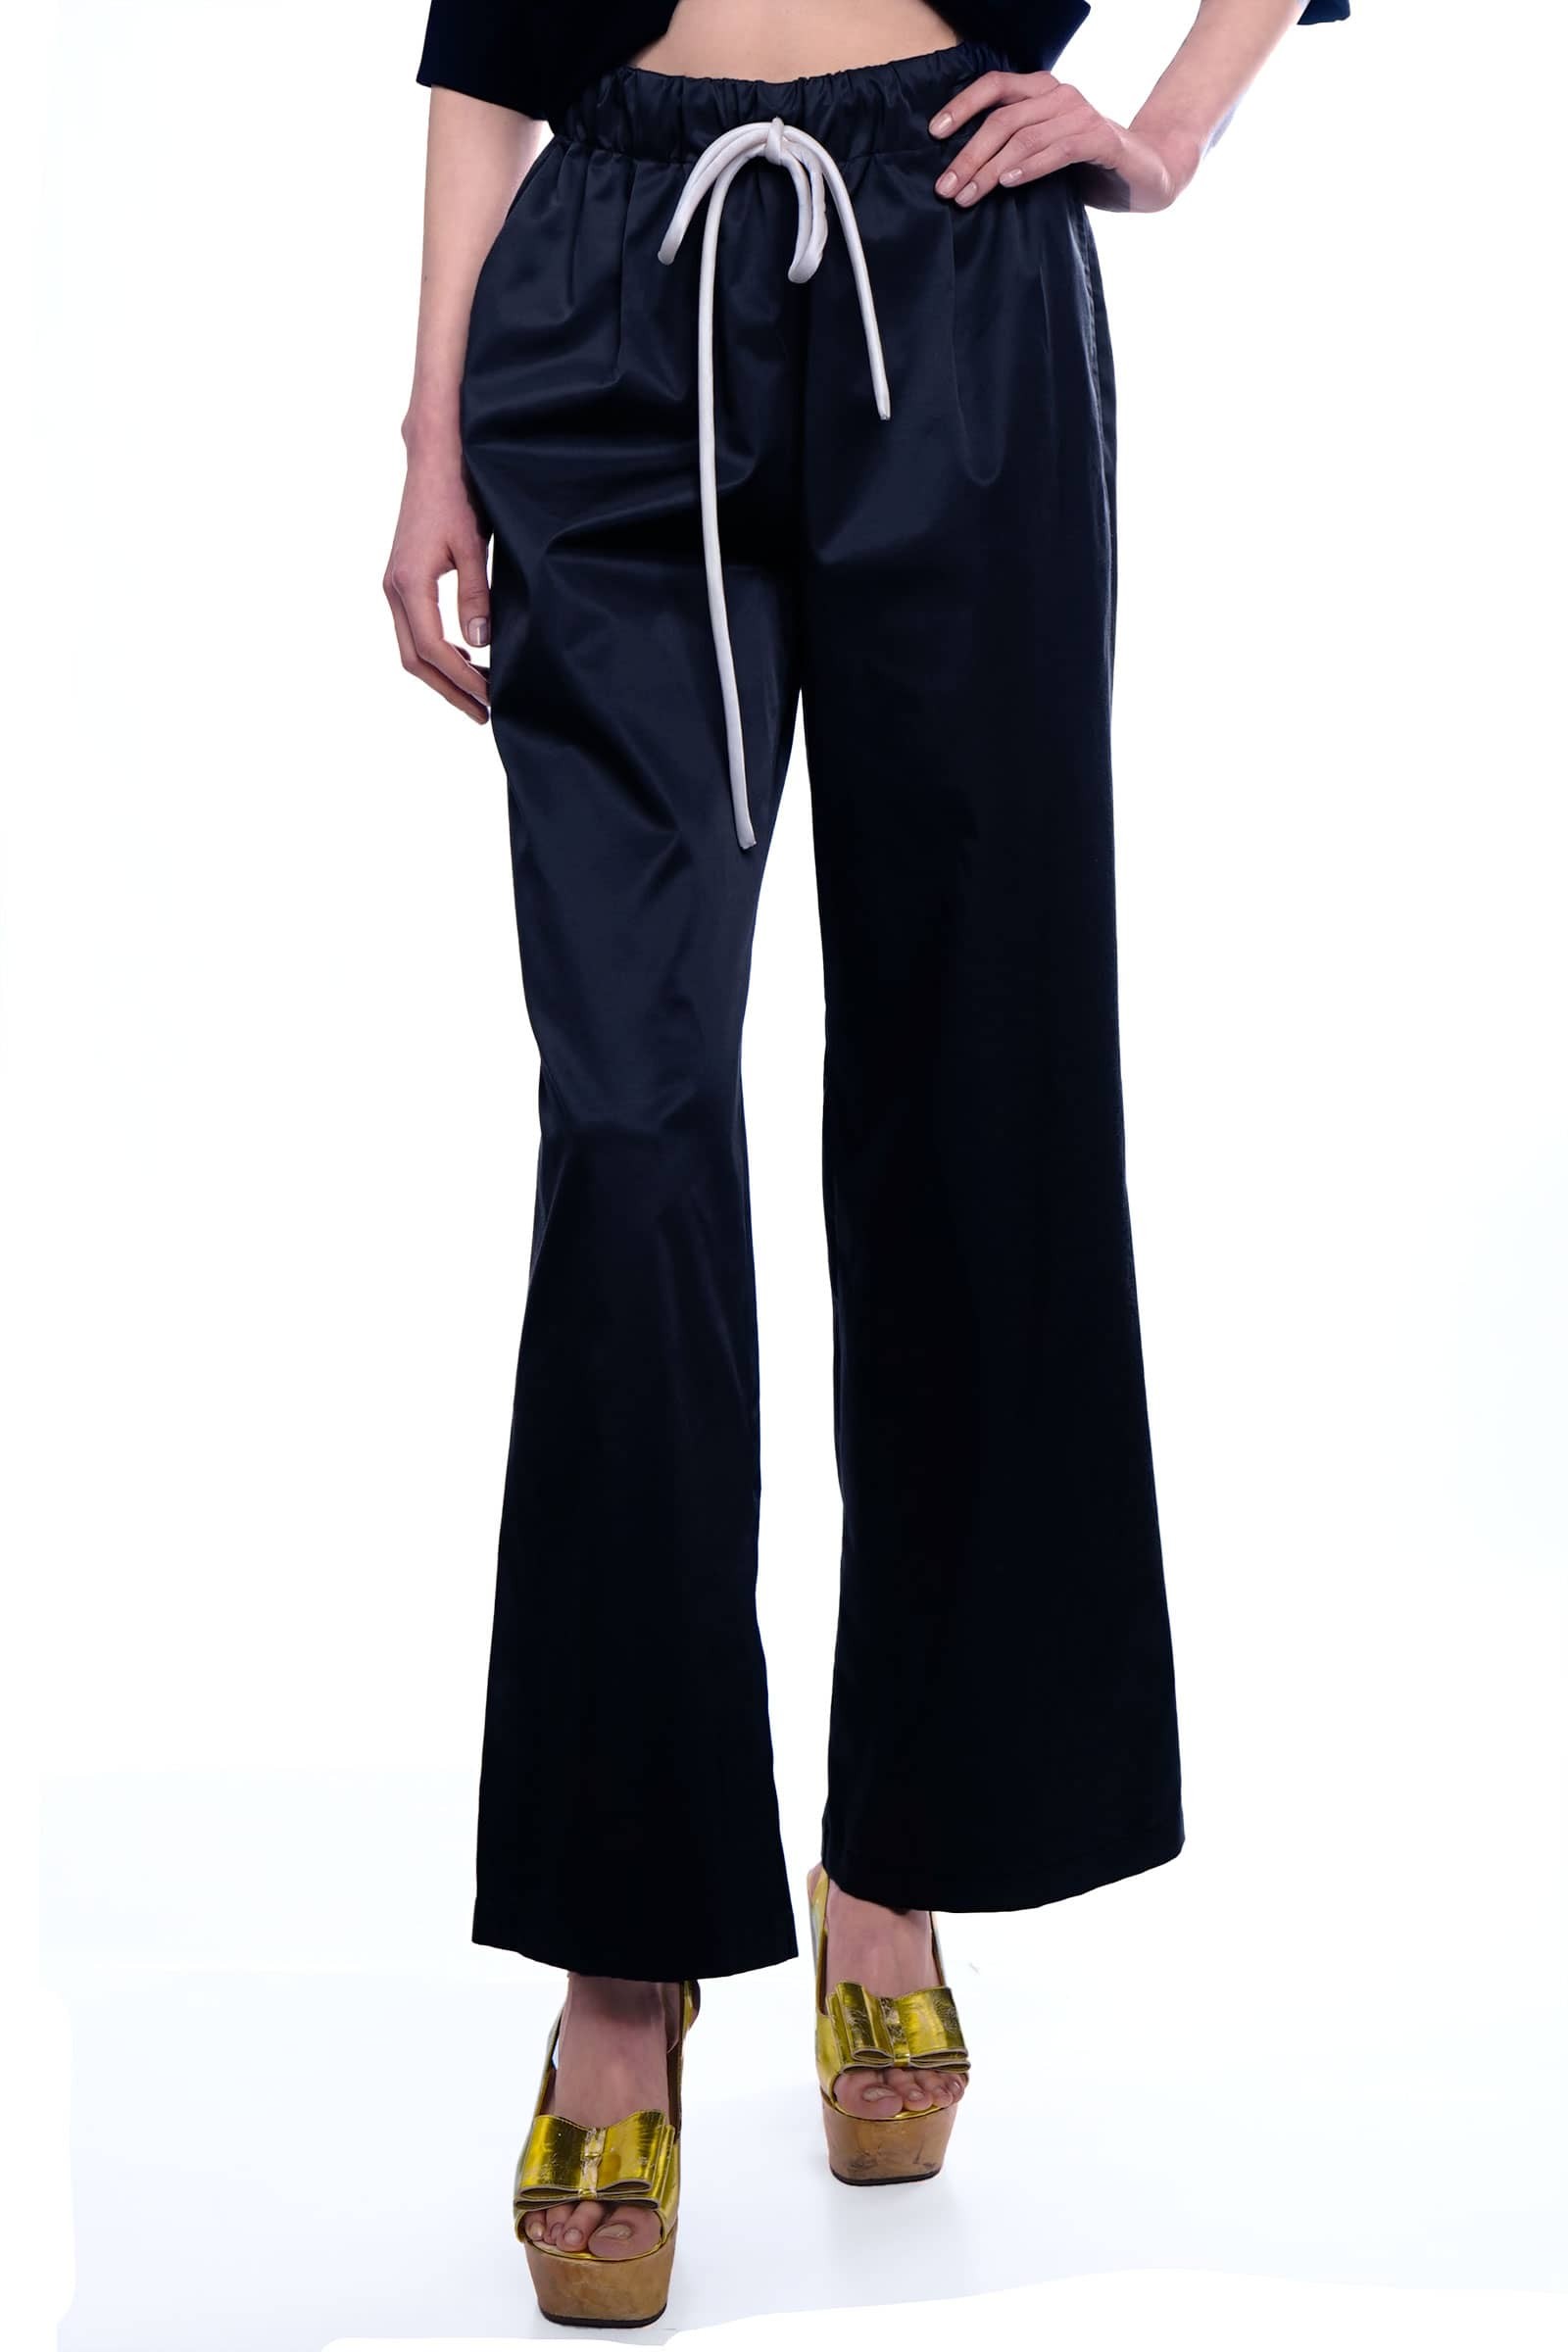 Wide black pants with white...